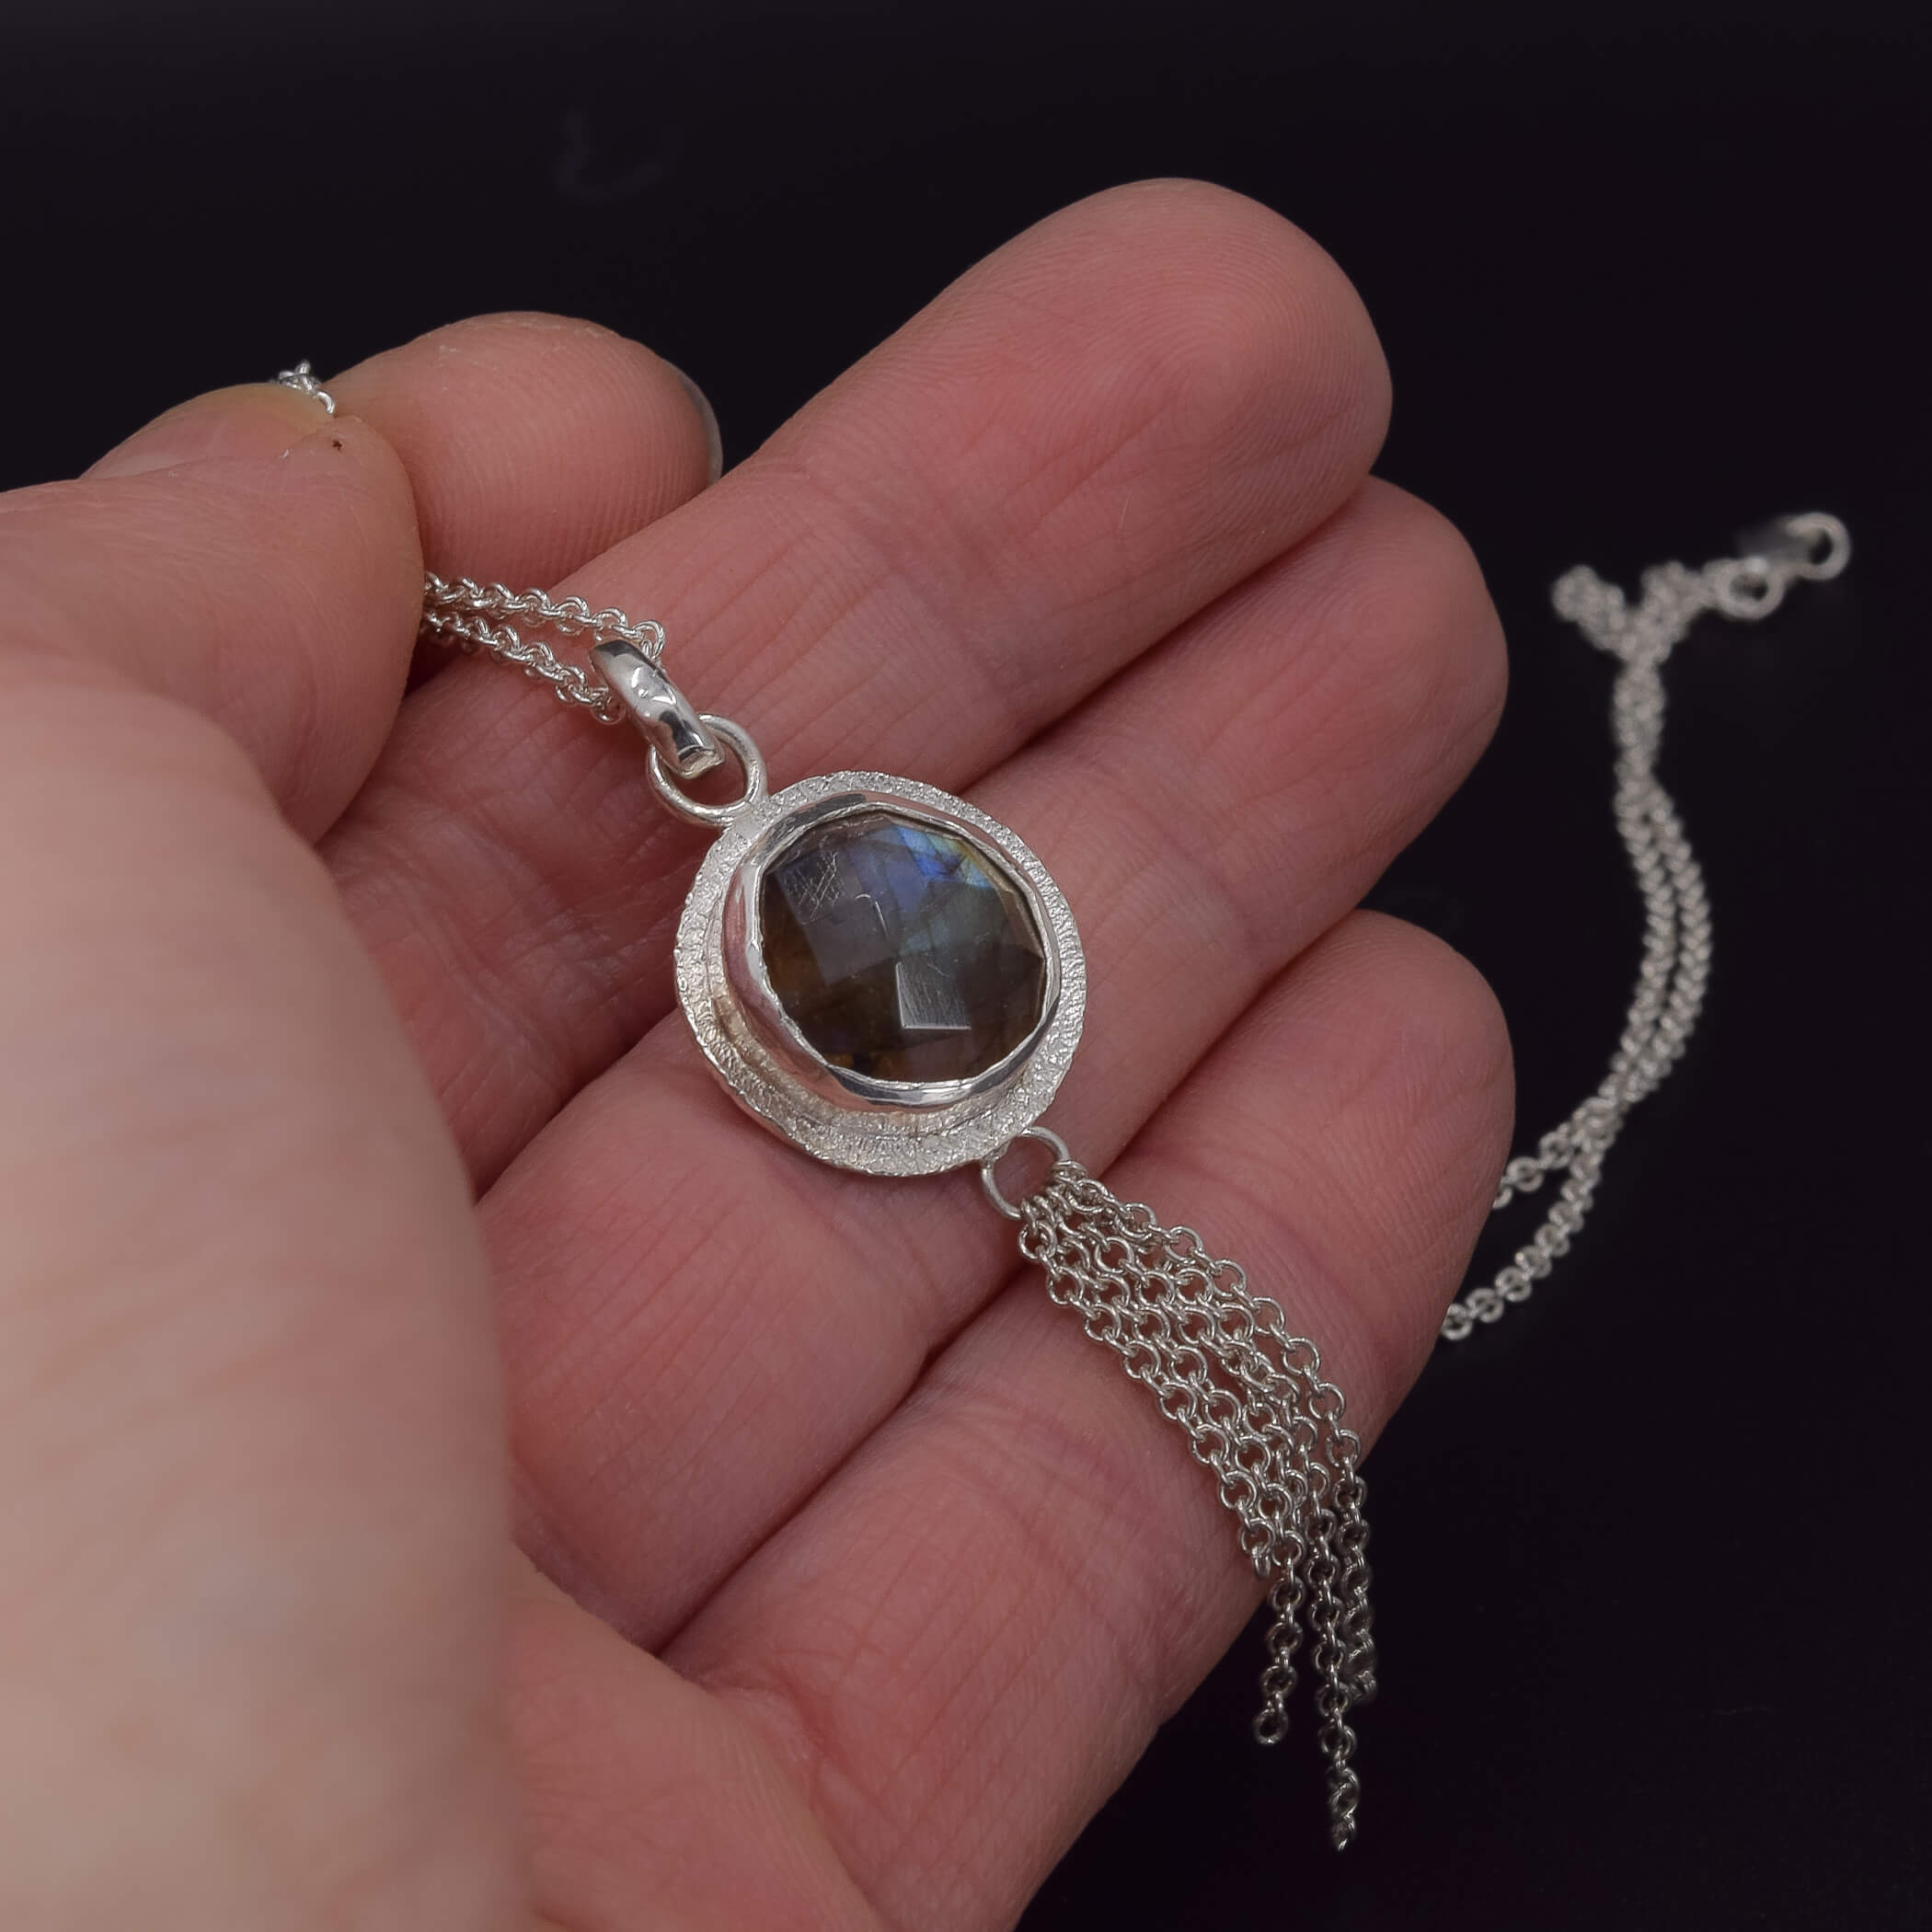  a round labradorite pendant necklace in sterling silver, which has a chain embellishment on the bottom shown in hand for scale